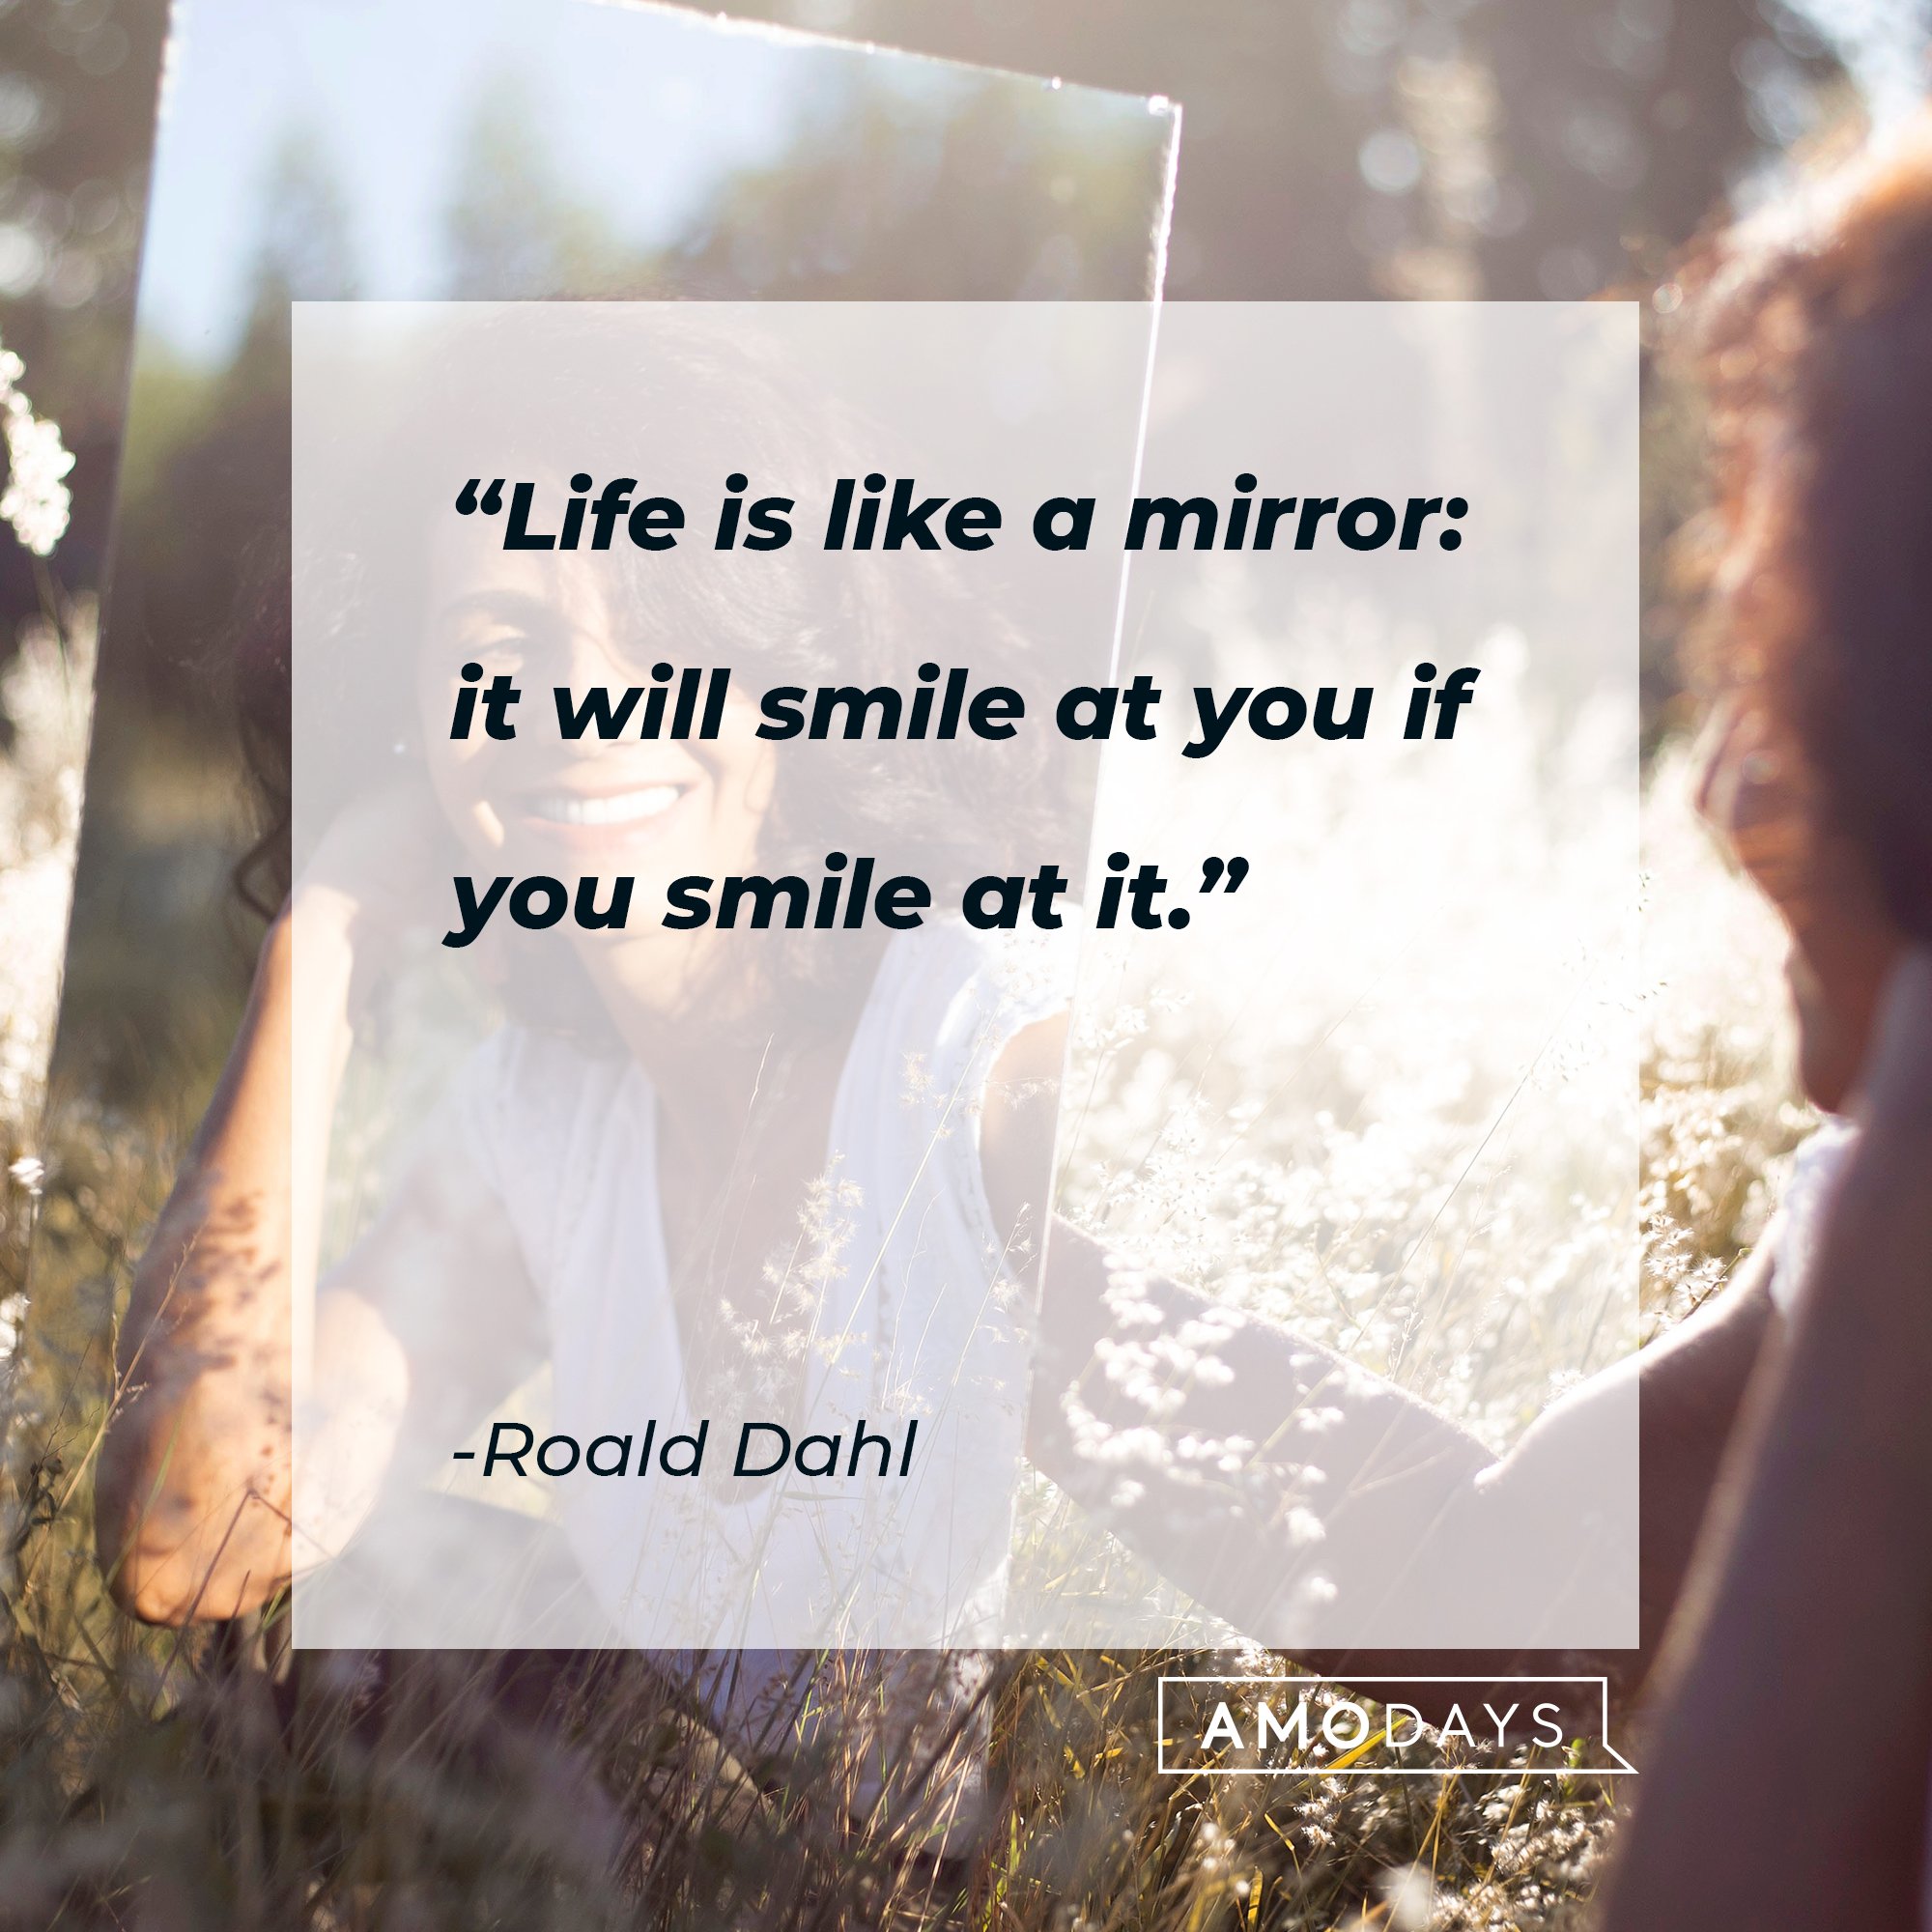 Roald Dahl's quote: "Life is like a mirror: it will smile at you if you smile at it." | Image: AmoDays 